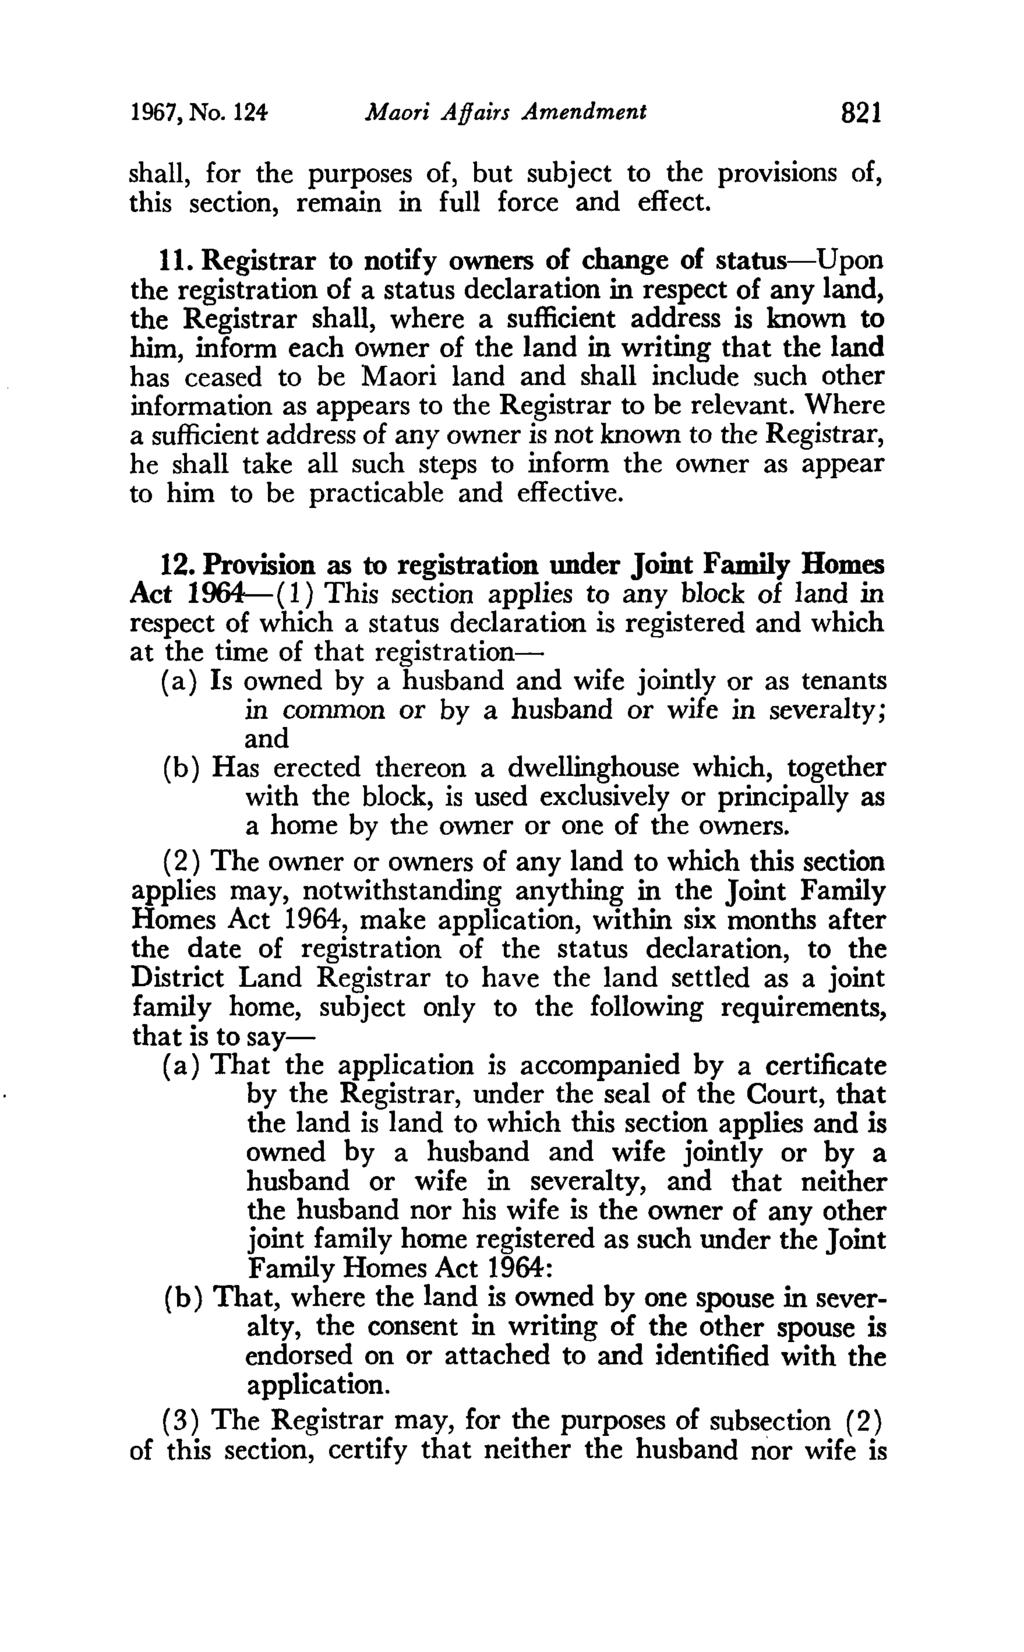 1967, No. 124 Maori Affairs Amendment 821 shall, for the purposes of, but subject to the provisions of, this section, remain in full force and effect. 11.